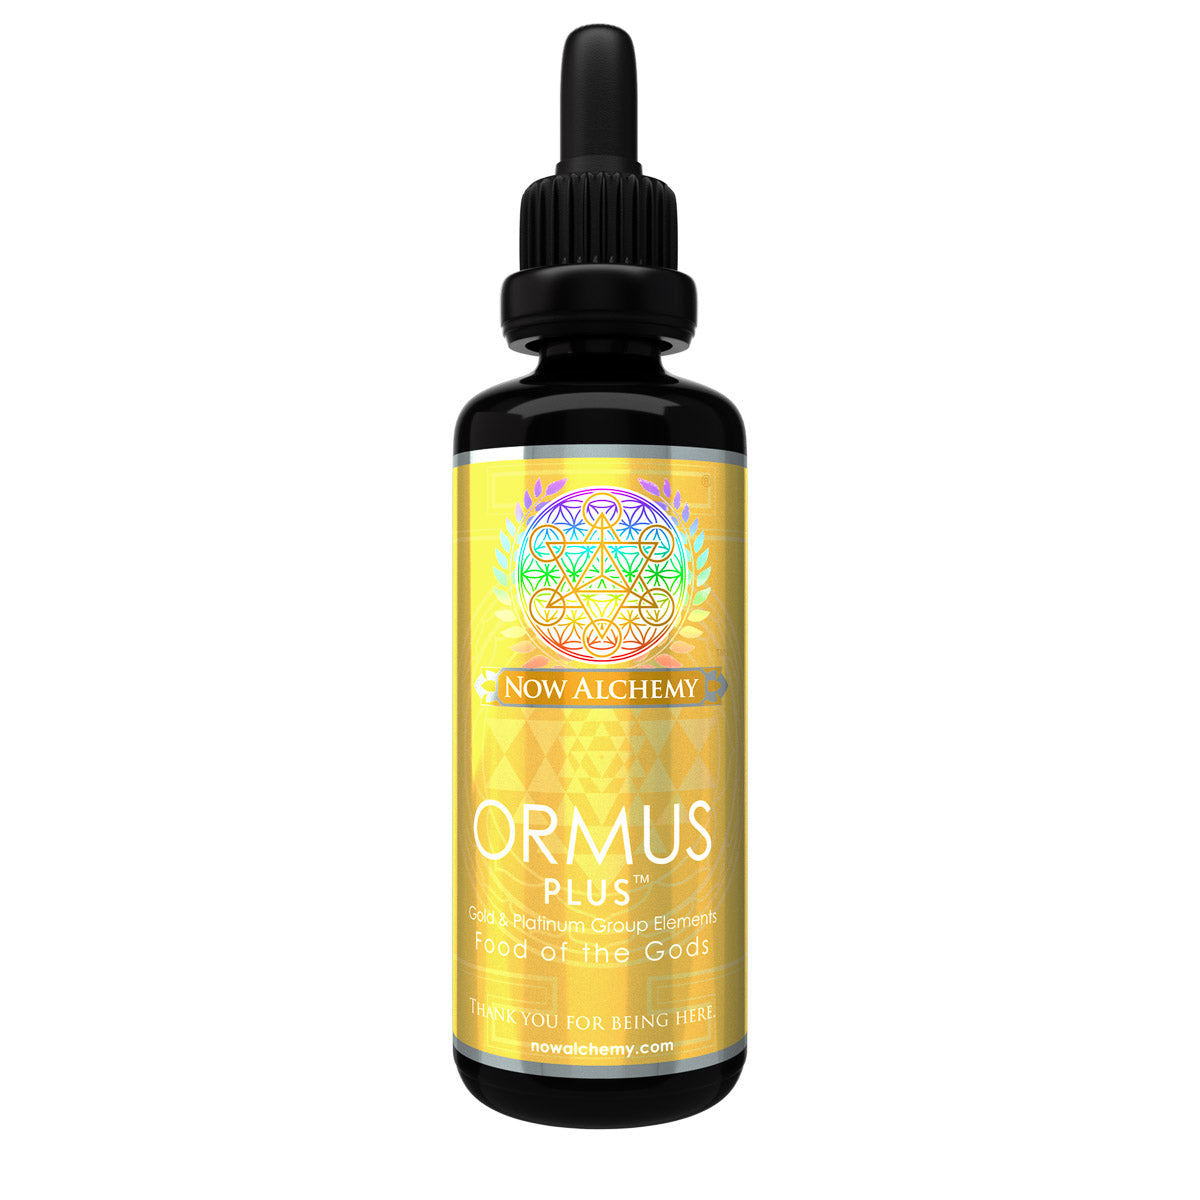 24k Gold Ormus PLUS | Now Alchemy | Raw Living UK | Supplements | Now Alchemy Ormus PLUS 24K Gold Ormus + Rhodium, Ruthenium, Platinum, Palladium, Silver &amp; Copper, with over 100 naturally occurring oceanic trace minerals.